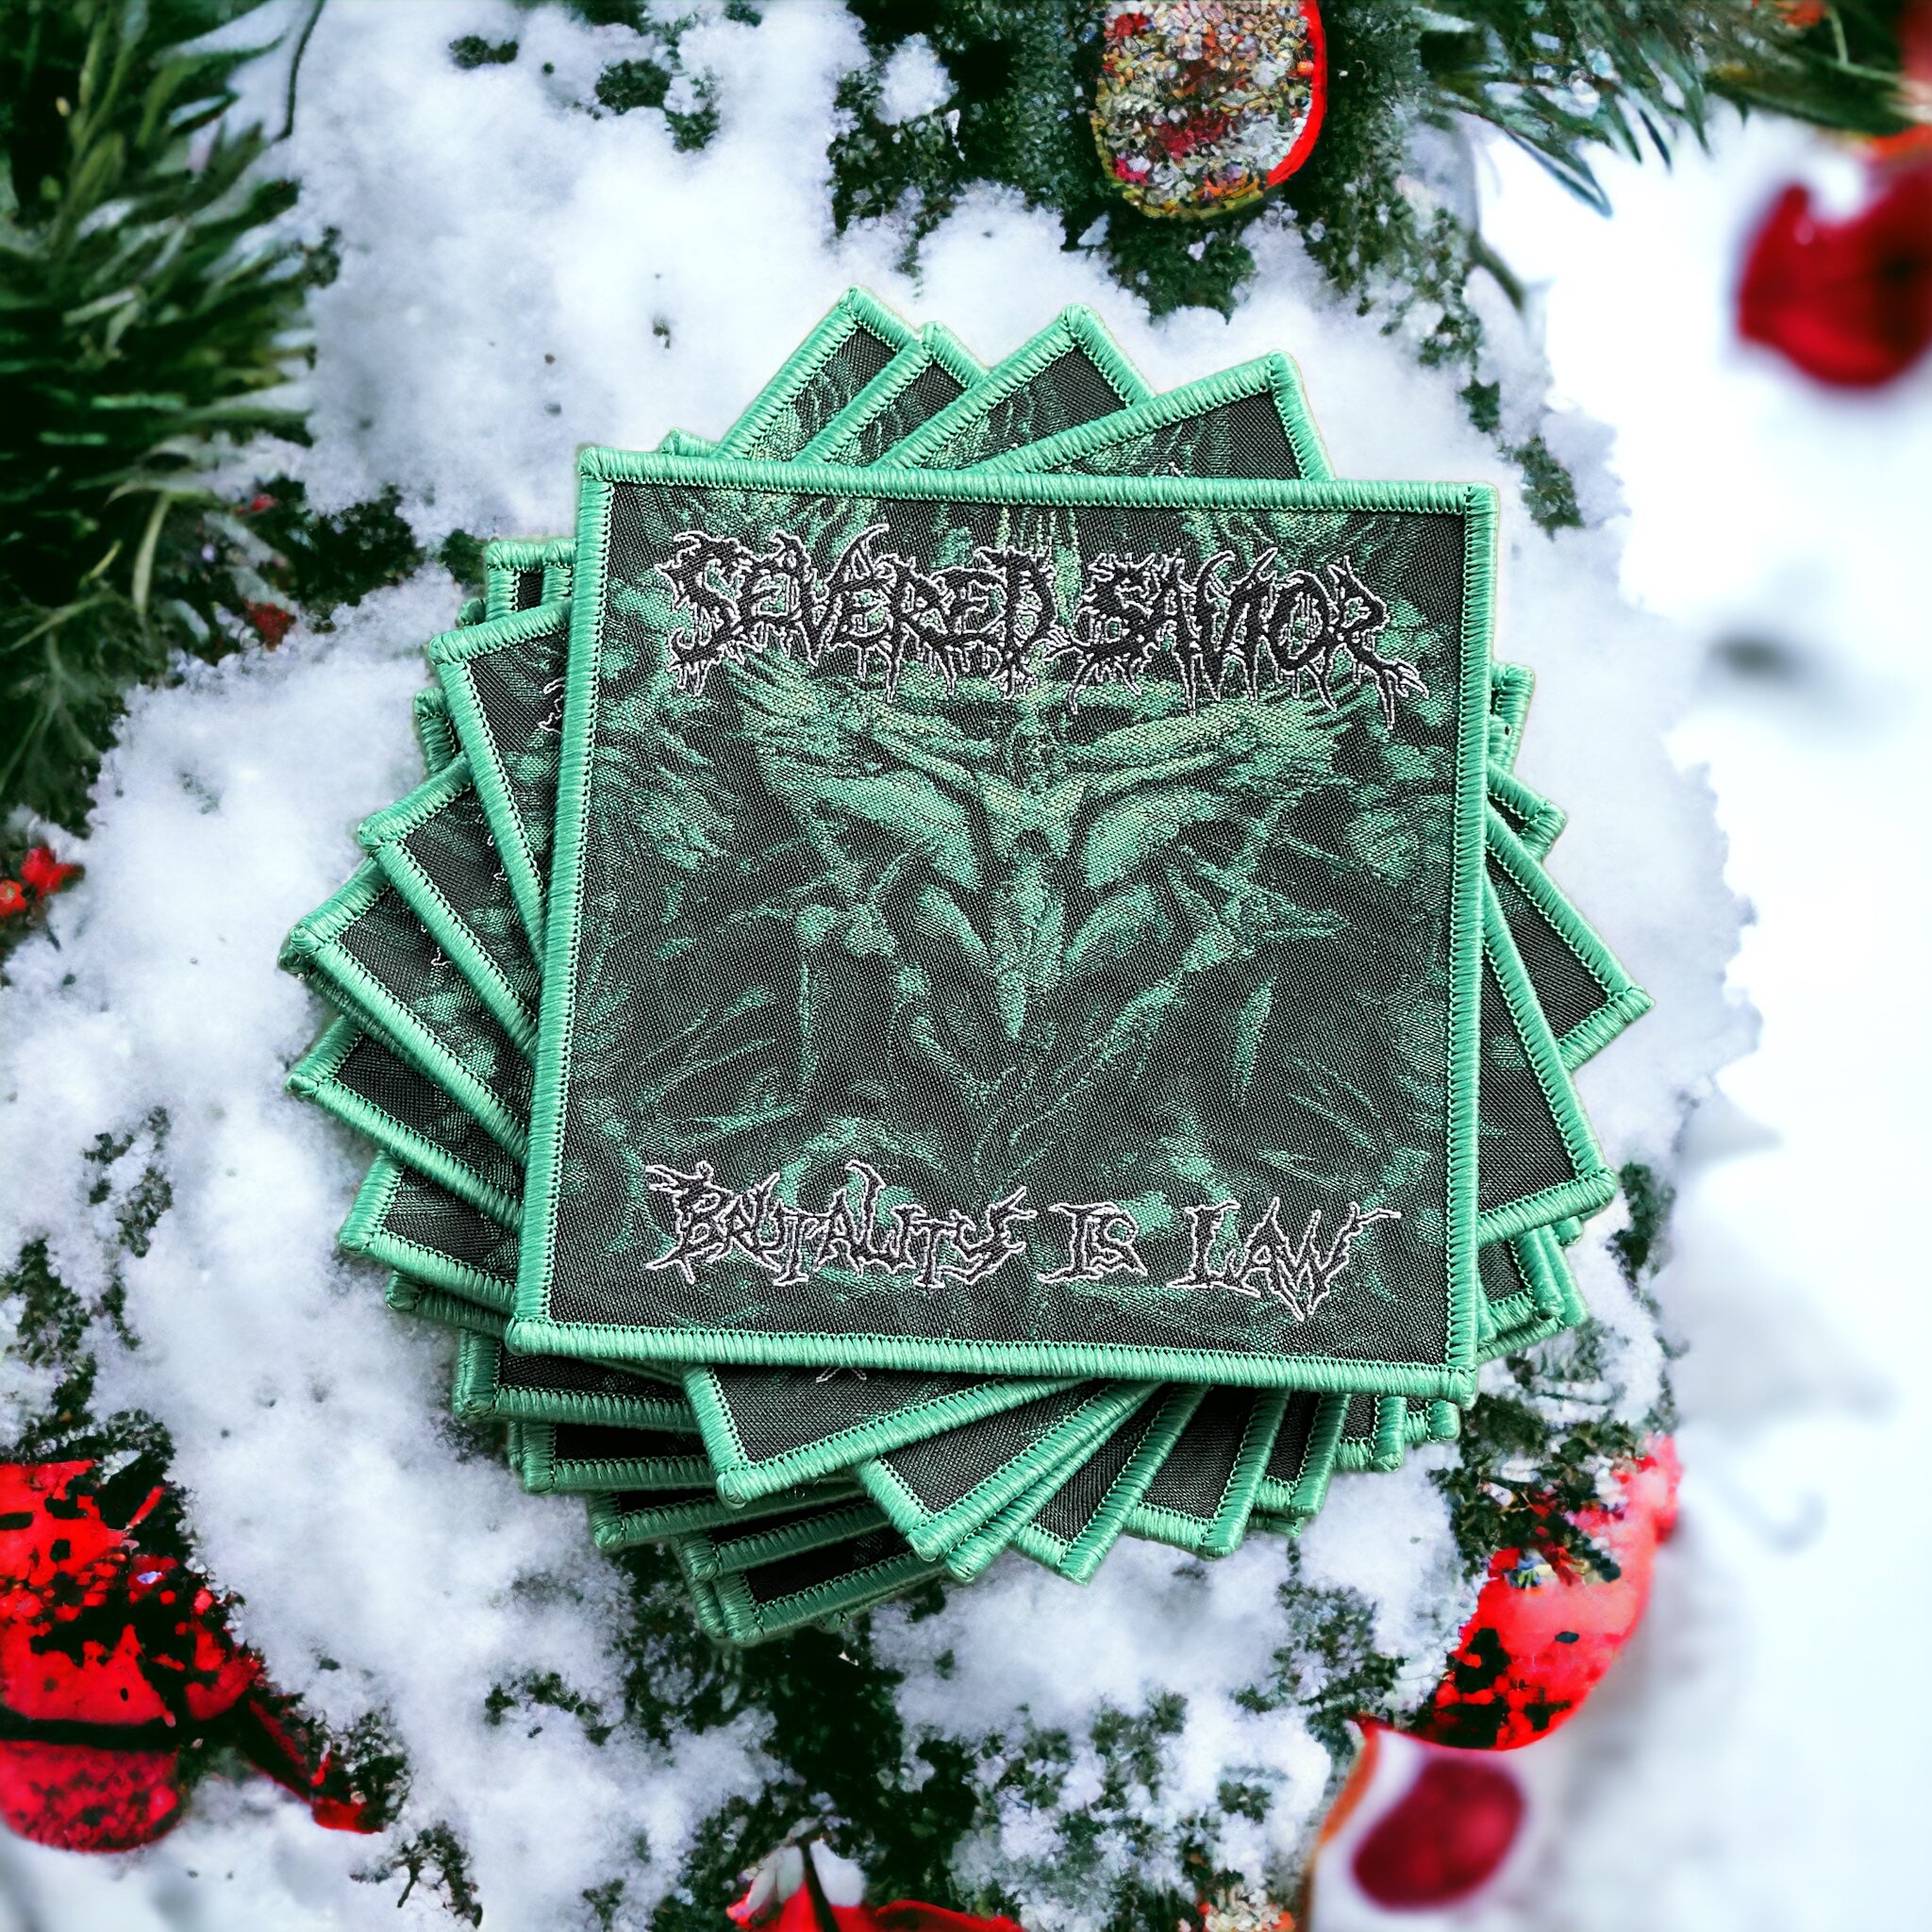 Severed Savior - Square Brutality is Law Patch - Green Border